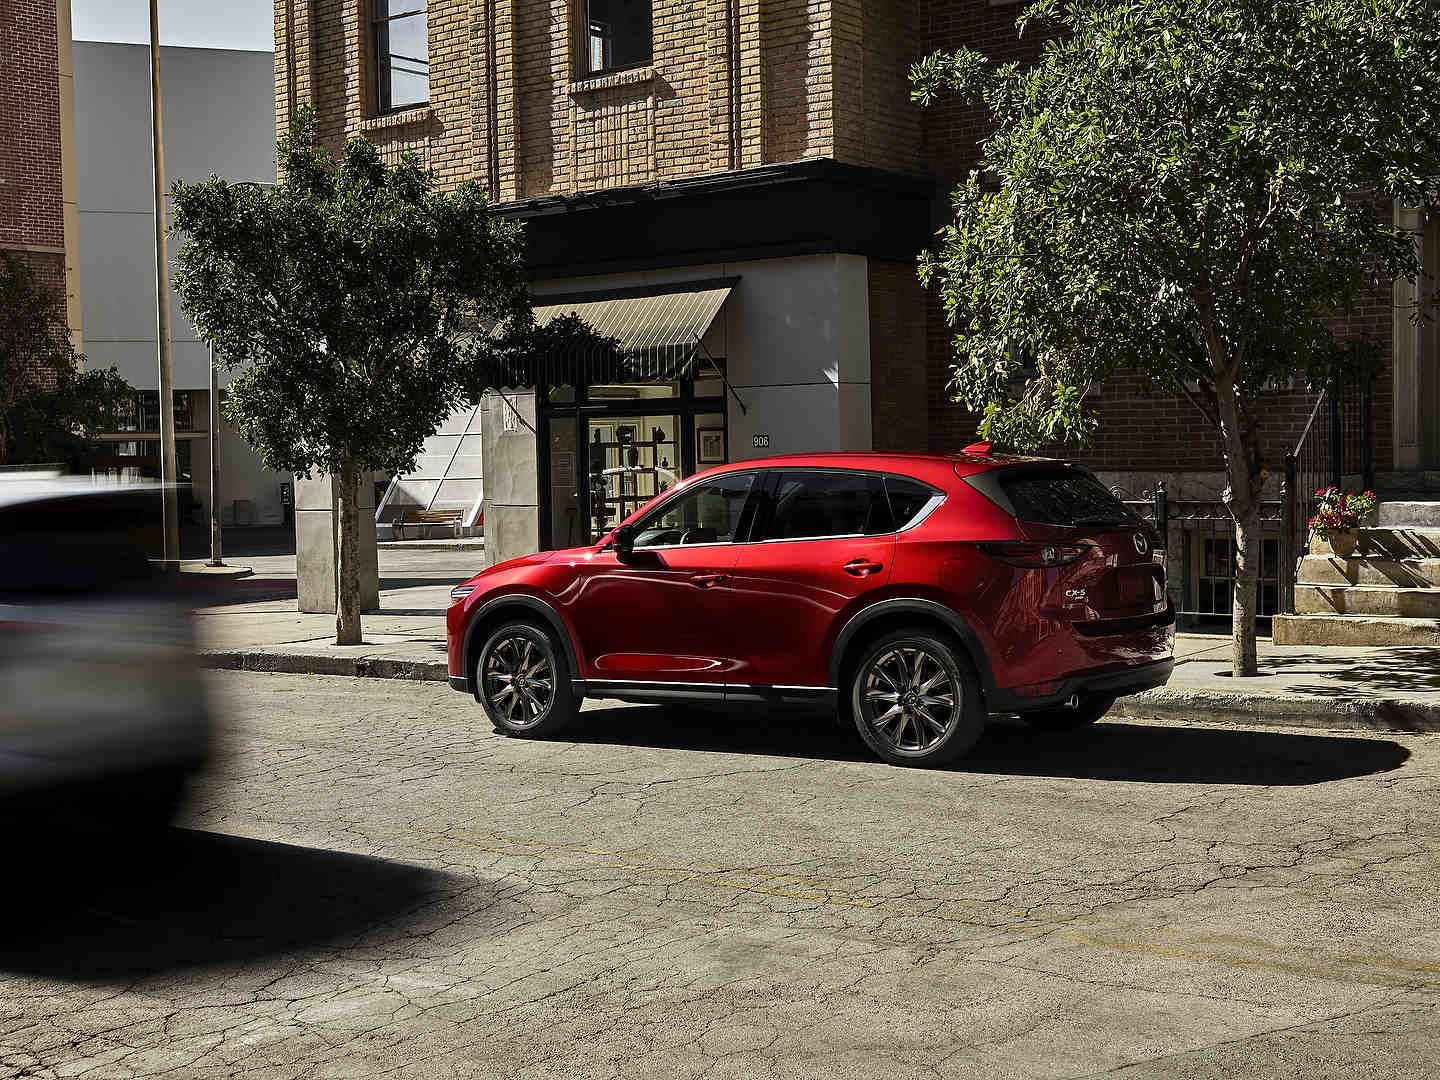 2021 Mazda CX-5 vs. 2021 Subaru Forester: The CX-5 Gives the Best of Both Worlds